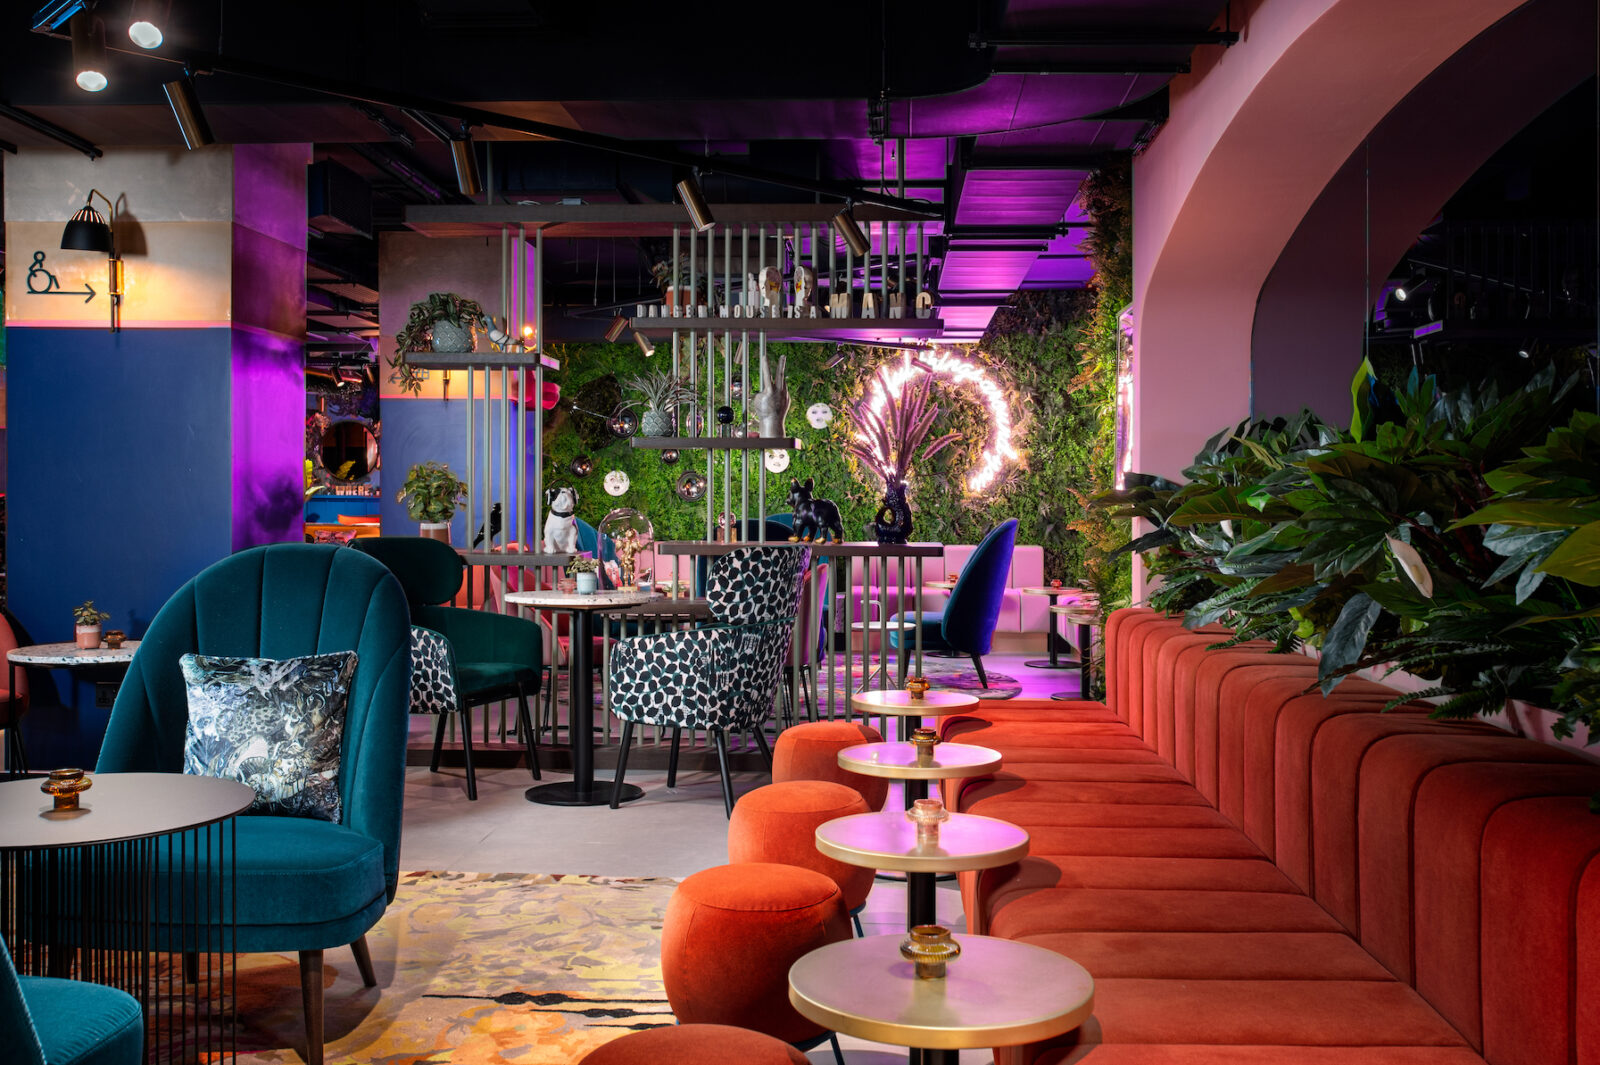 Motley Manchester, a hotel in the city centre that will soon be offering Dubai-inspired bottomless brunches